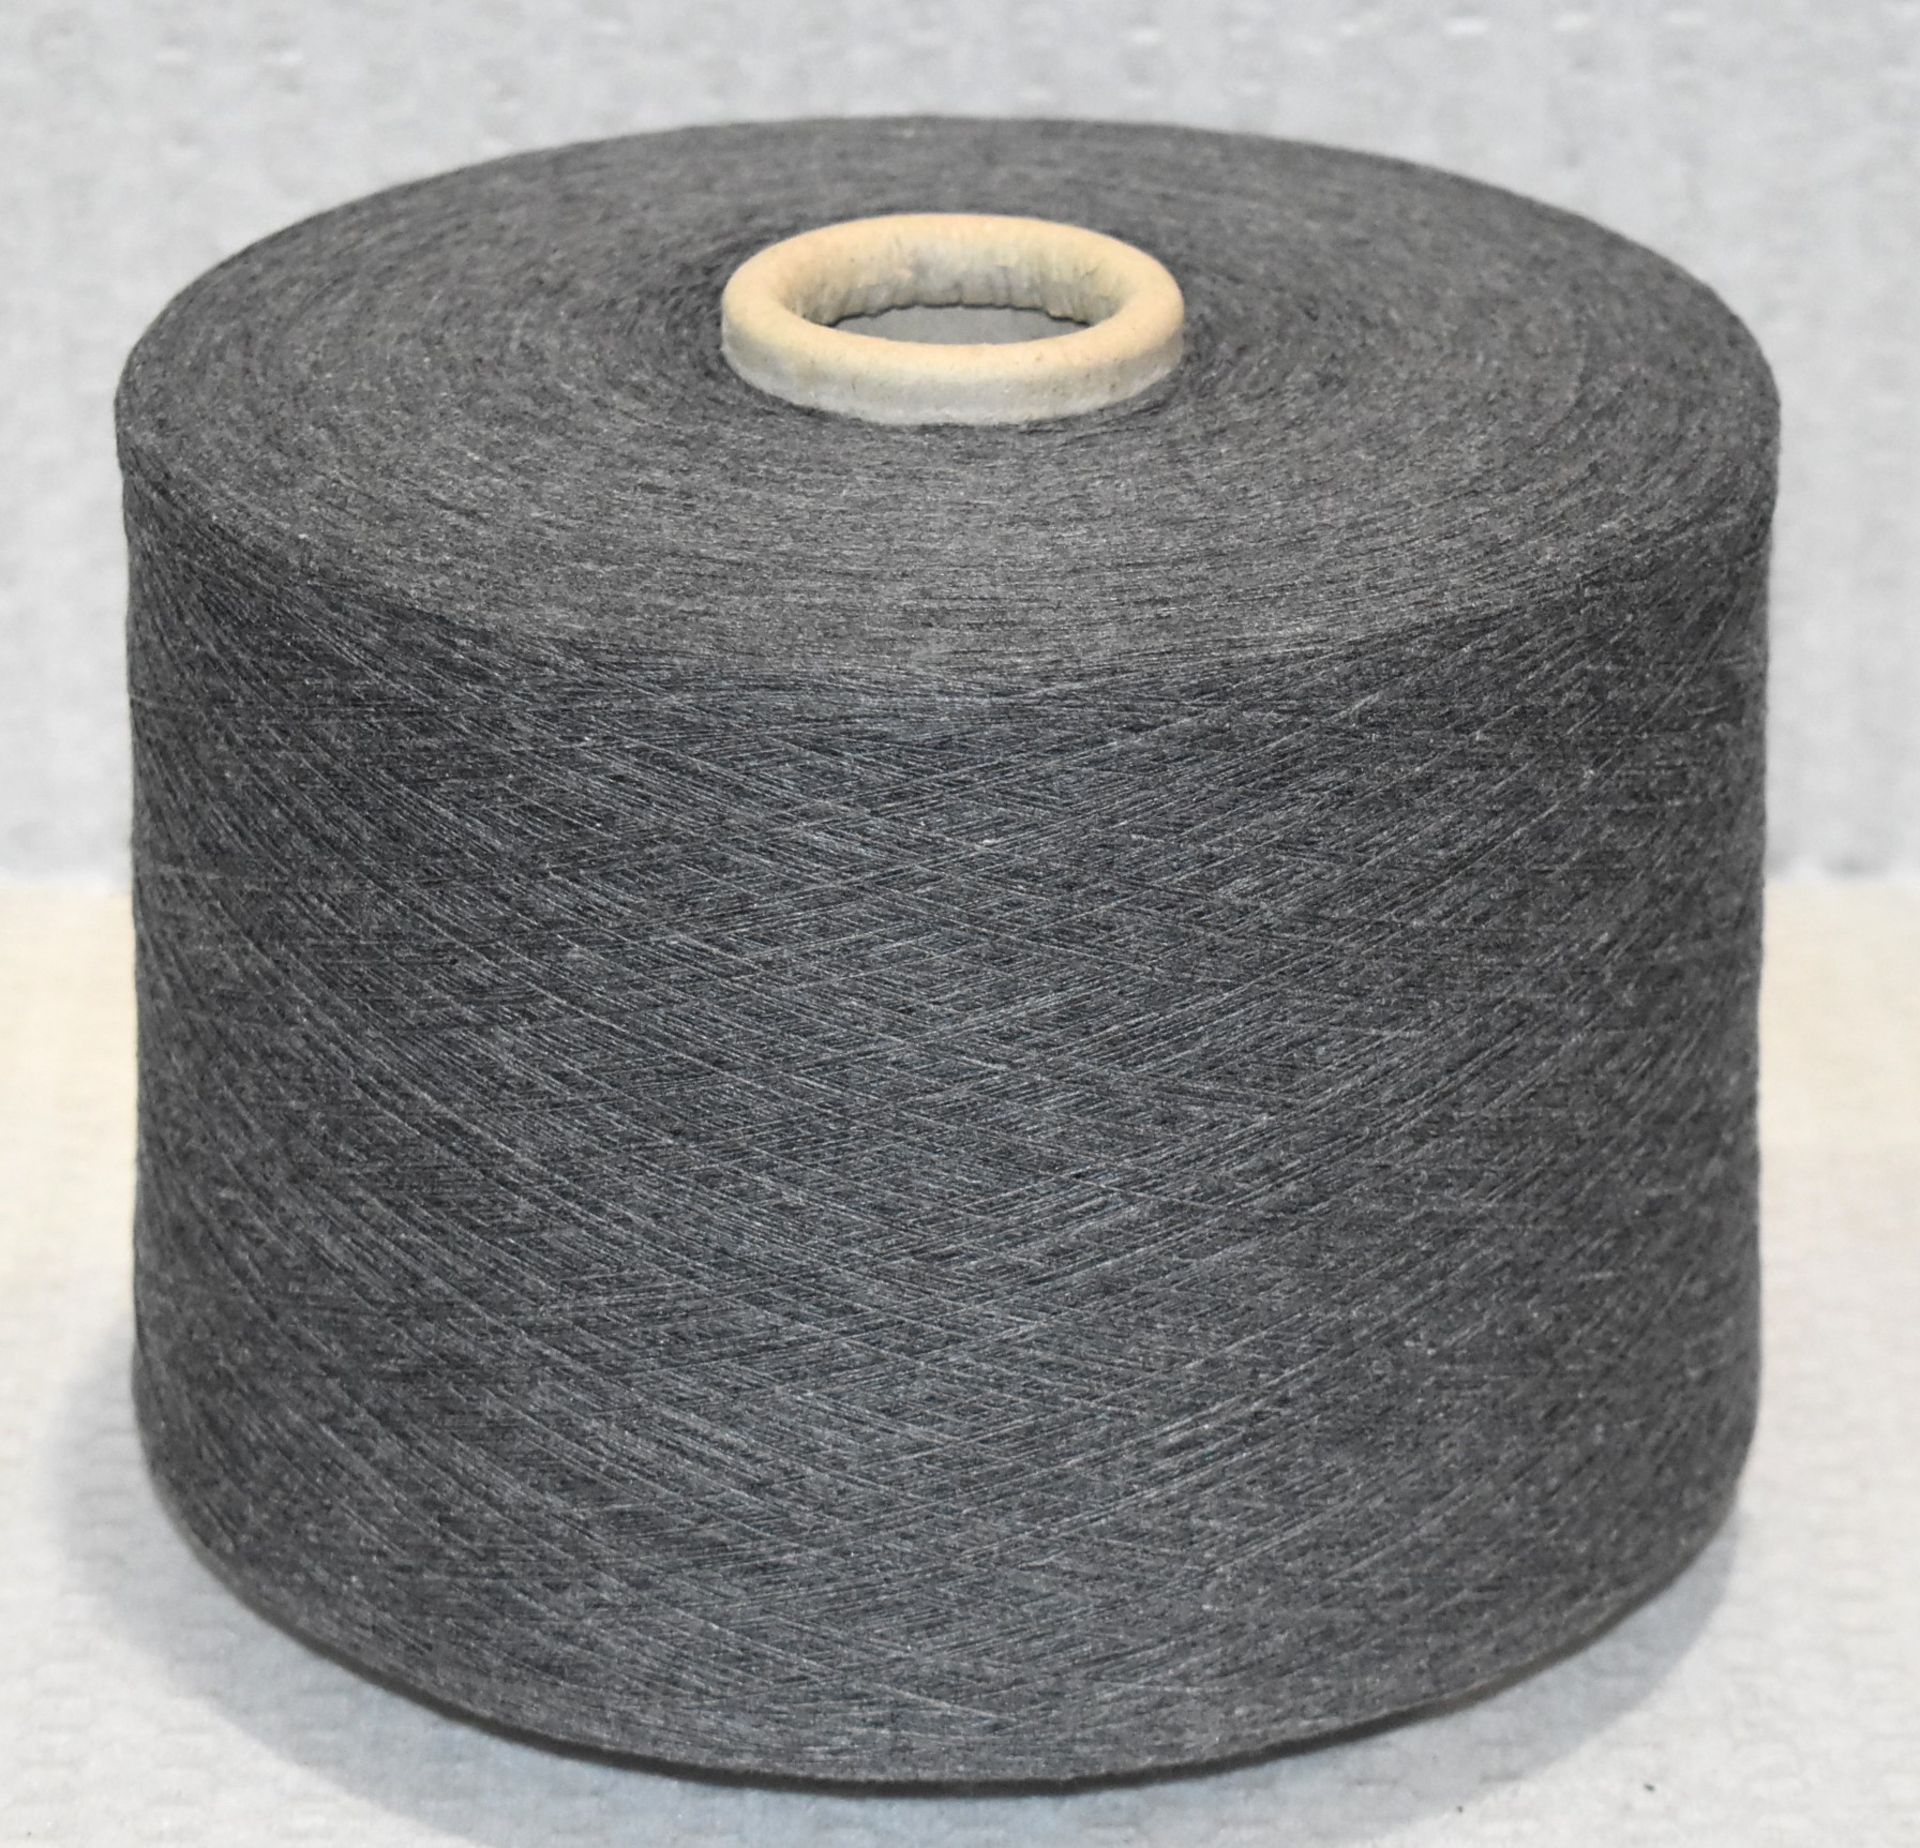 36 x Cones of 1/13 MicroCotton Knitting Yarn - Mid Grey - Approx Weight: 2,500g - New Stock ABL Yarn - Image 3 of 12